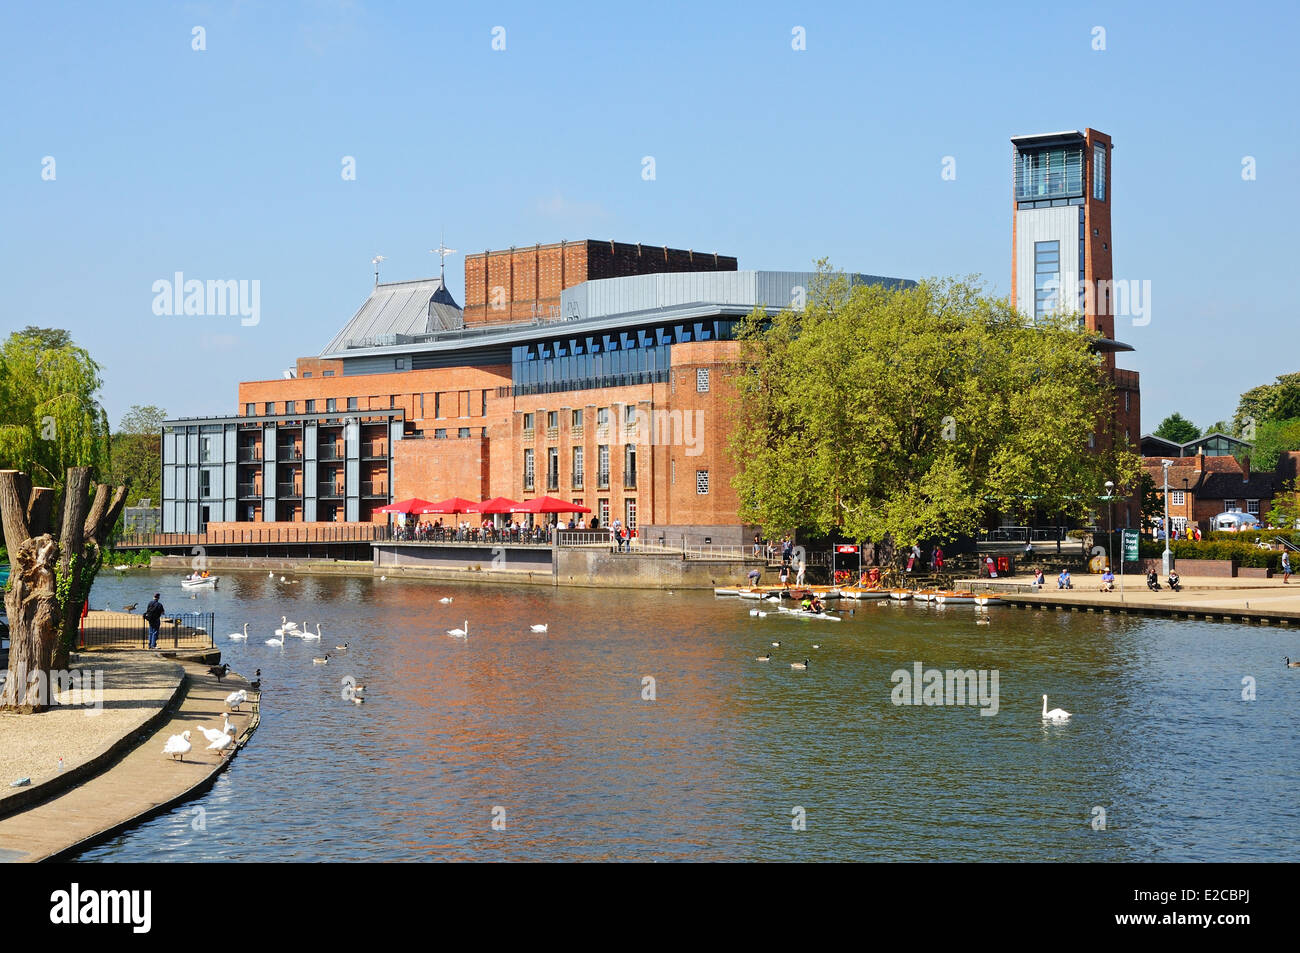 Royal Shakespeare Company Theatre along the River Avon with swans in the foreground, Stratford-Upon-Avon, England, UK. Stock Photo